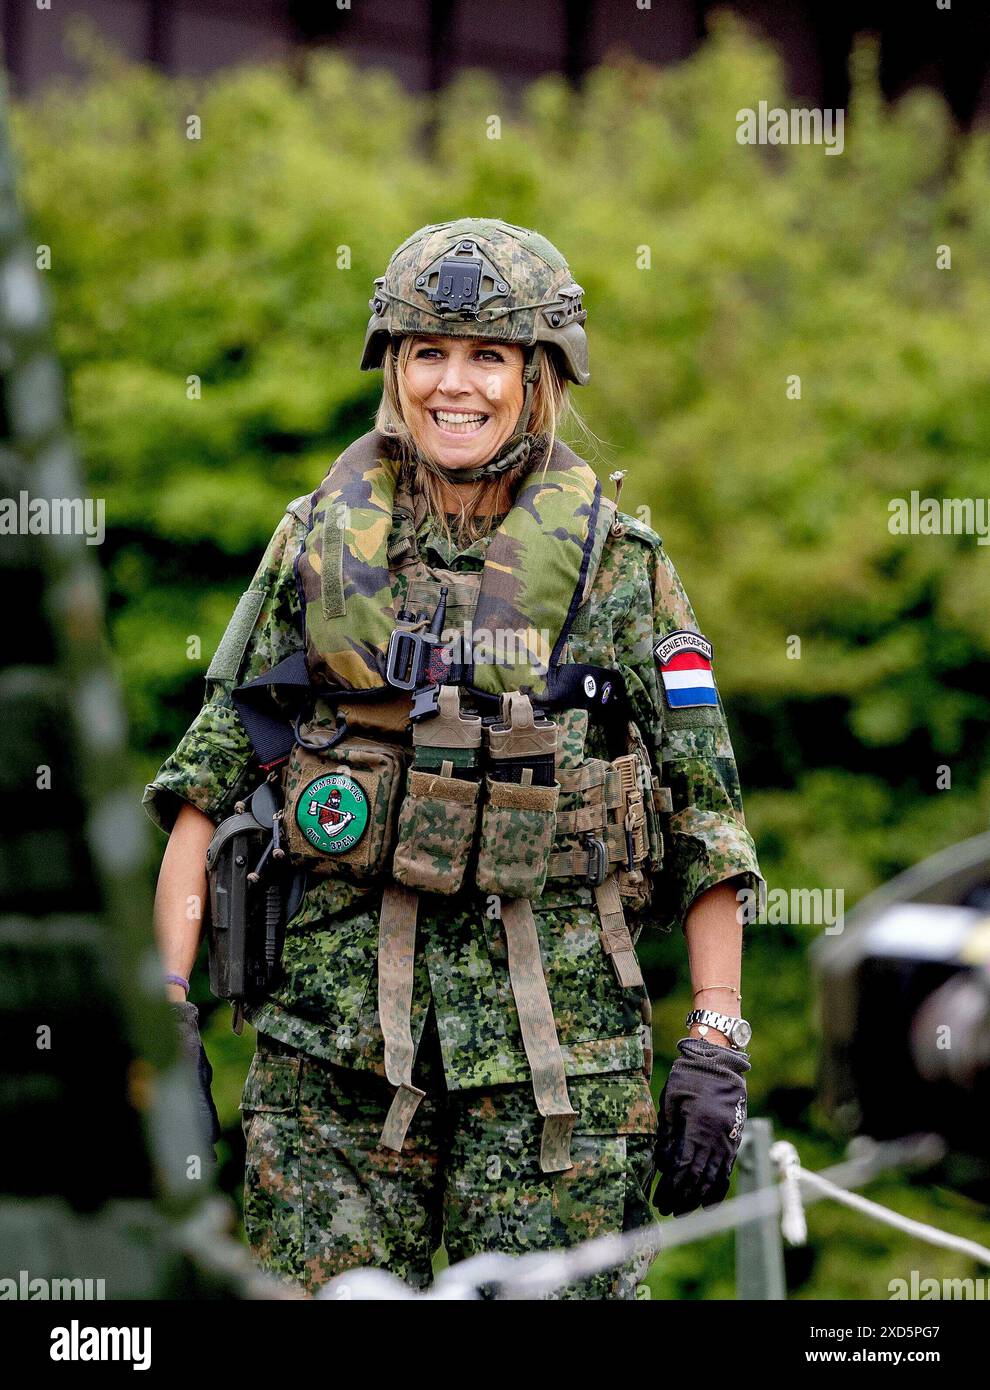 Queen Maxima of The Netherlands at the Defensiecomplex Fort Crevecoeur in Den Bosch, on June 20, 2024, to attend the exercise of the Regiment of Engineers, it is a combat support unit. This specific armed forces unit is trained in clearing obstacles and building military infrastructure such as bridges and ferries Photo: Albert Nieboer/Netherlands OUT/Point de Vue OUT Stock Photo